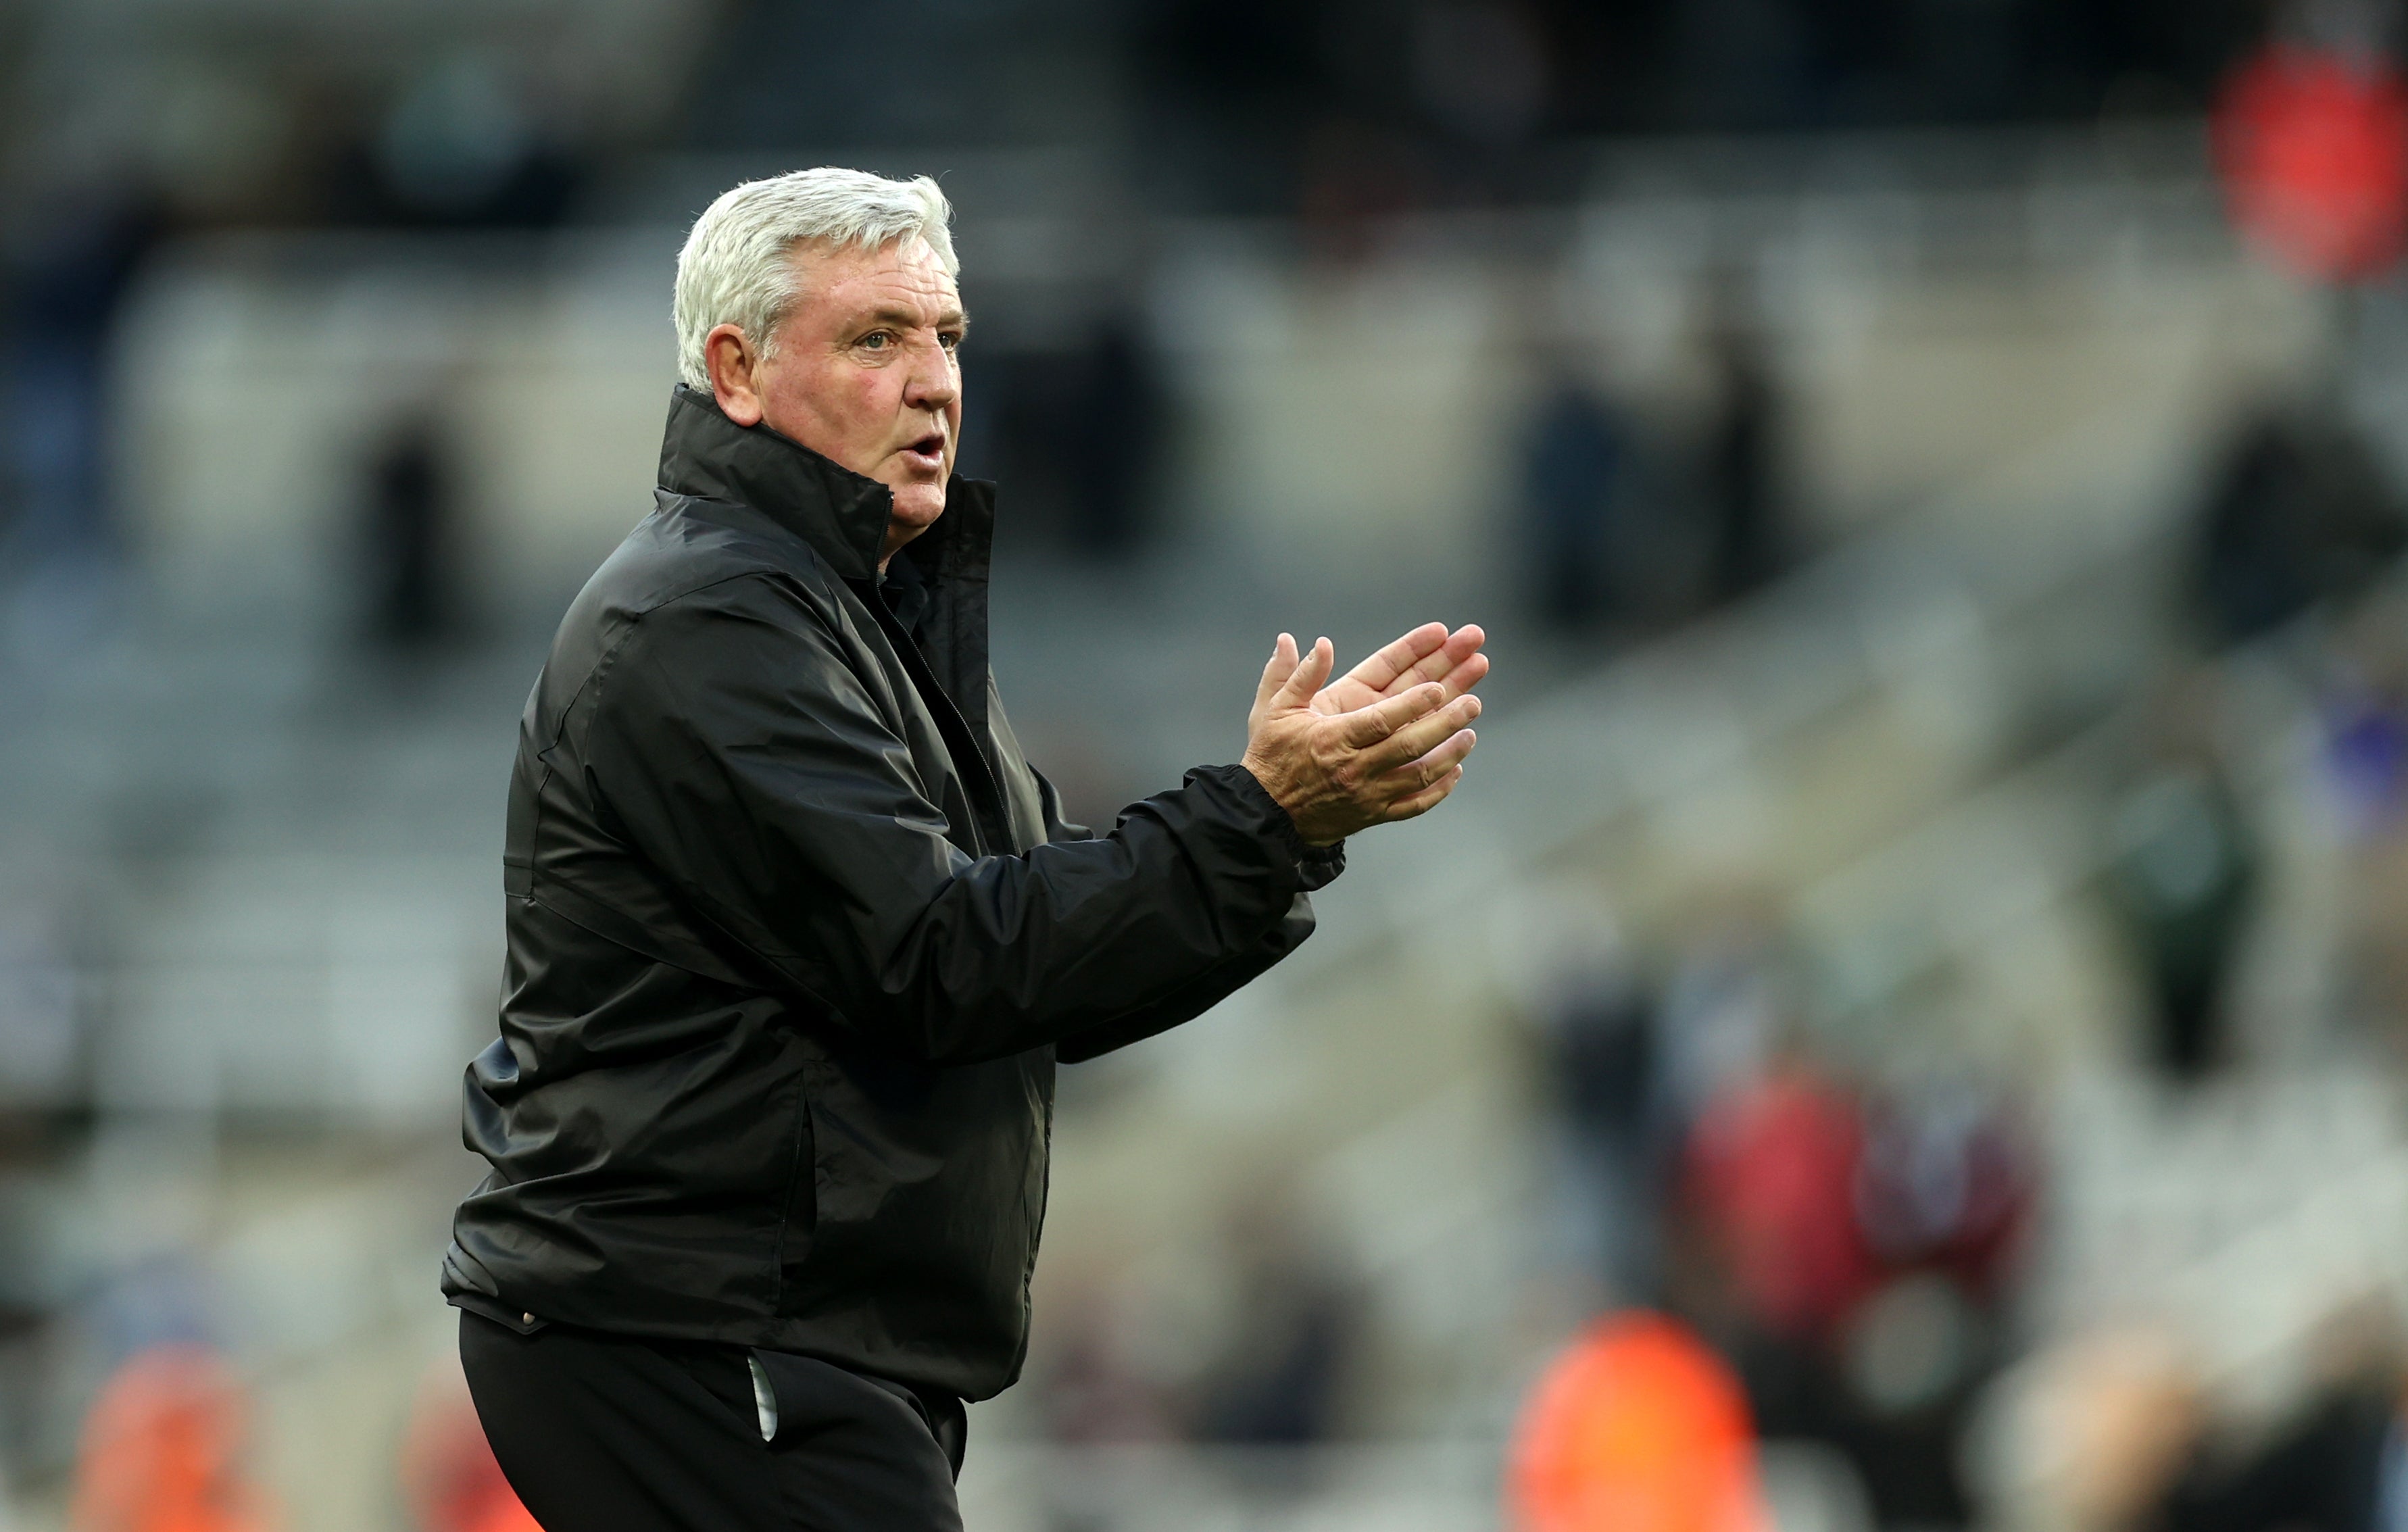 Newcastle heed coach Steve Bruce is targeting a winning end to a difficult season